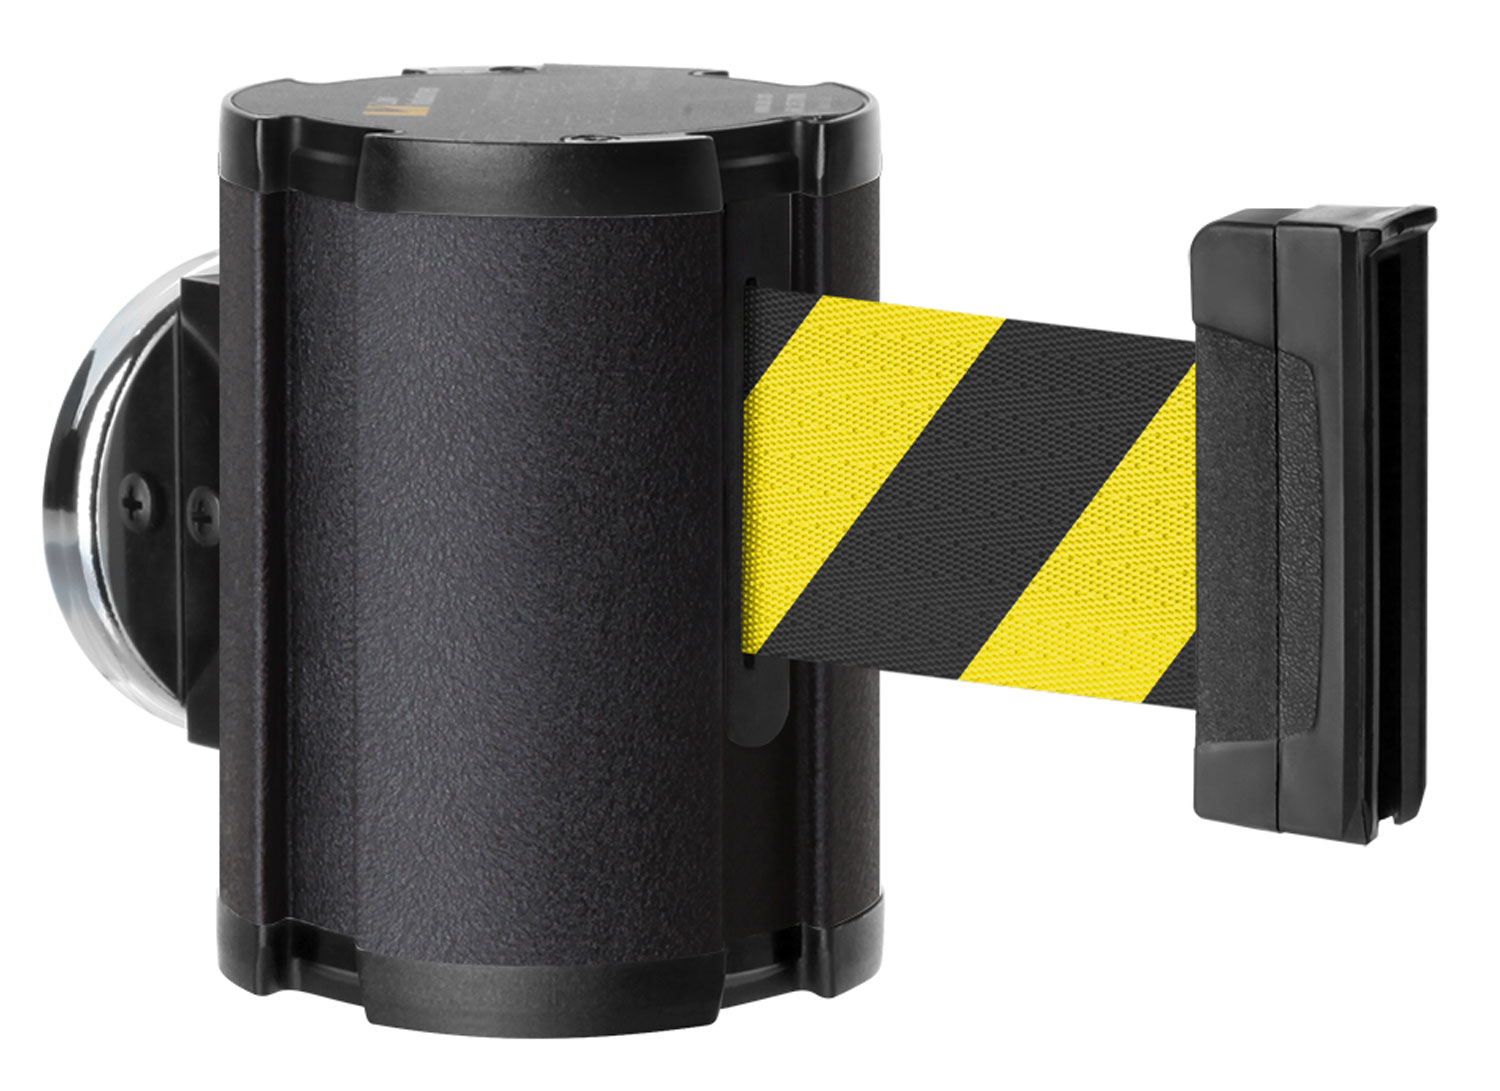 Magnetic Wall Mount - Crowd Control/Barriers